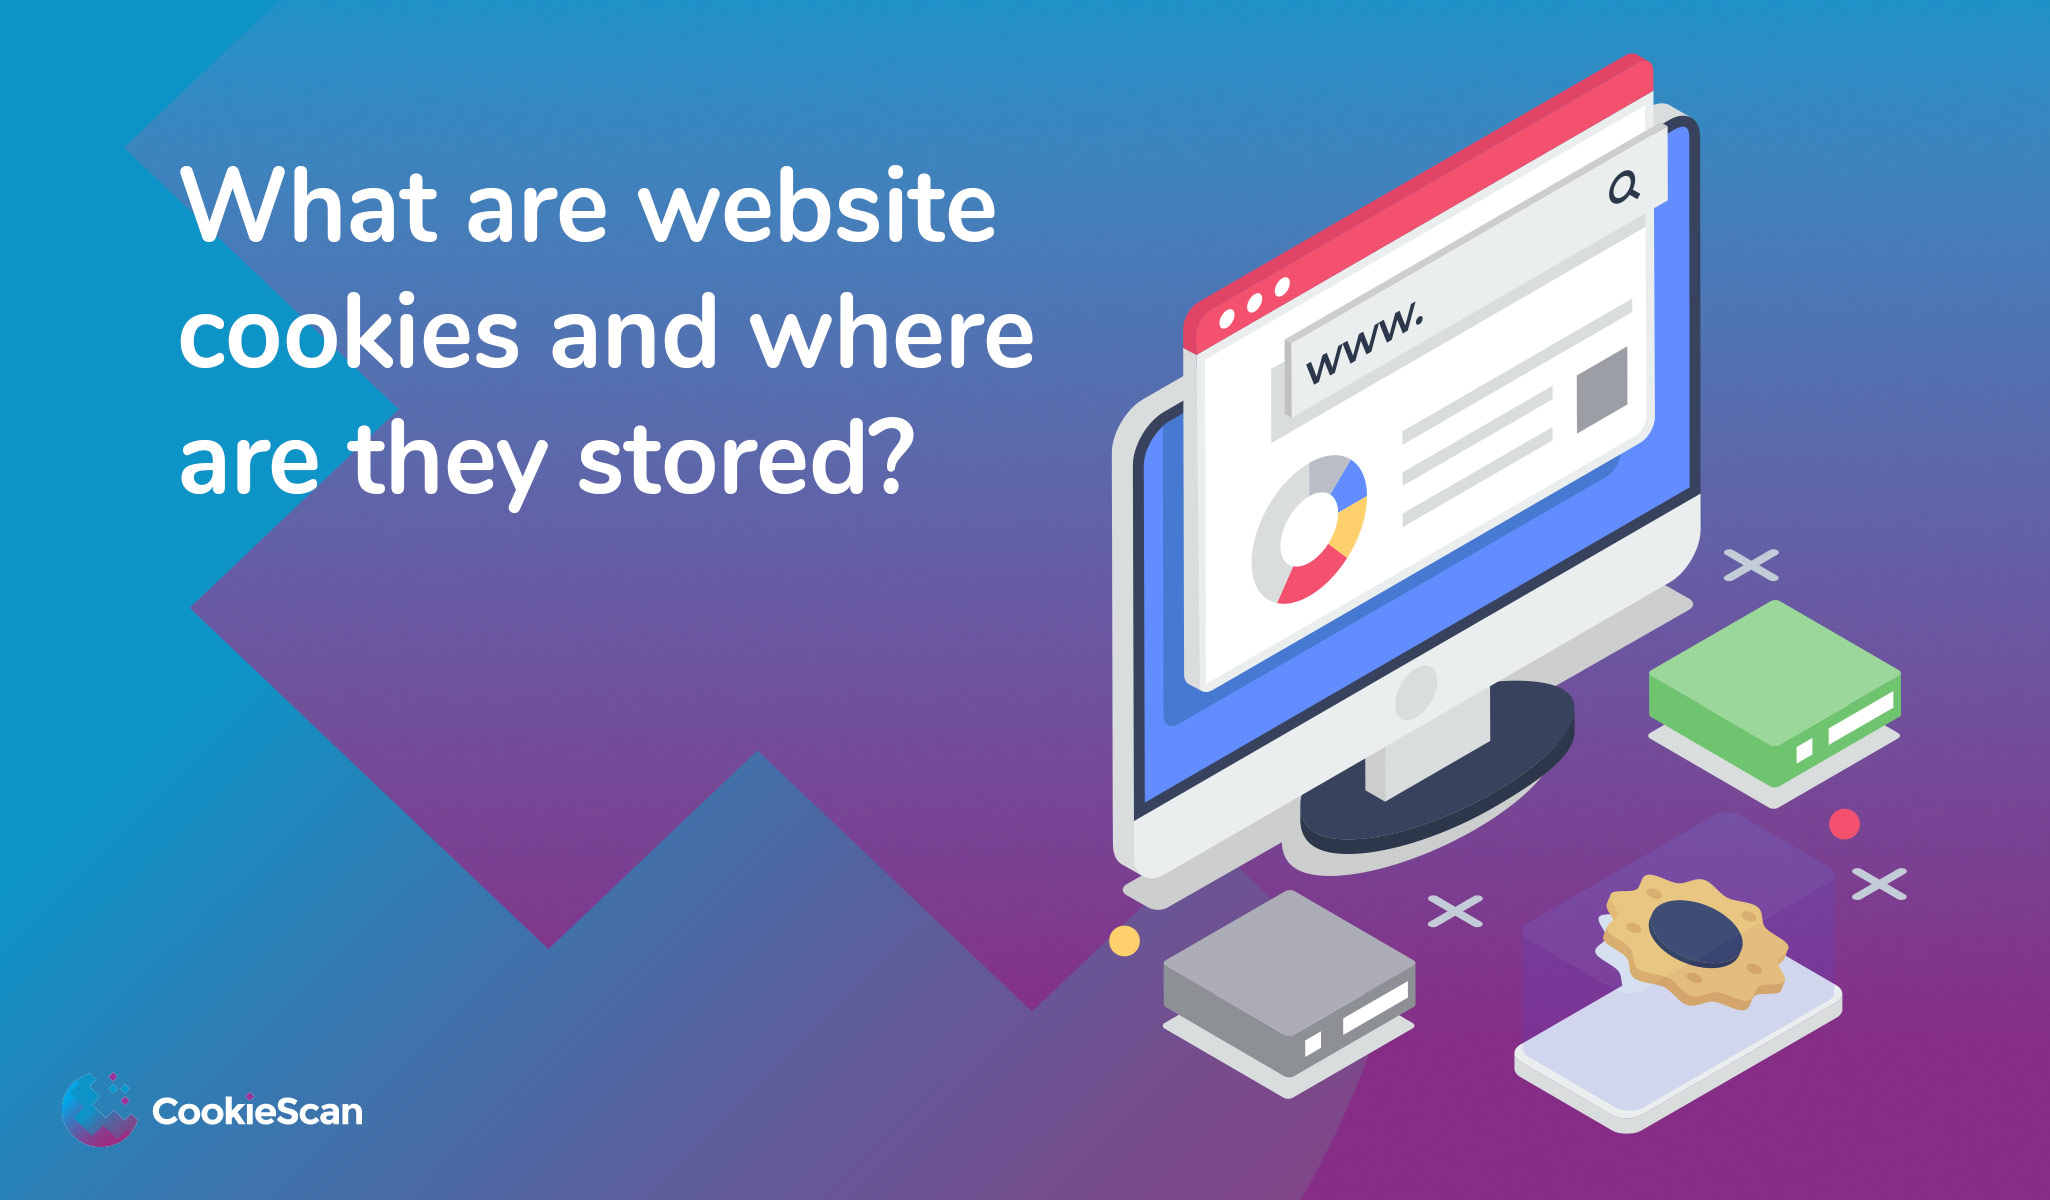 What are website cookies and where are they stored?